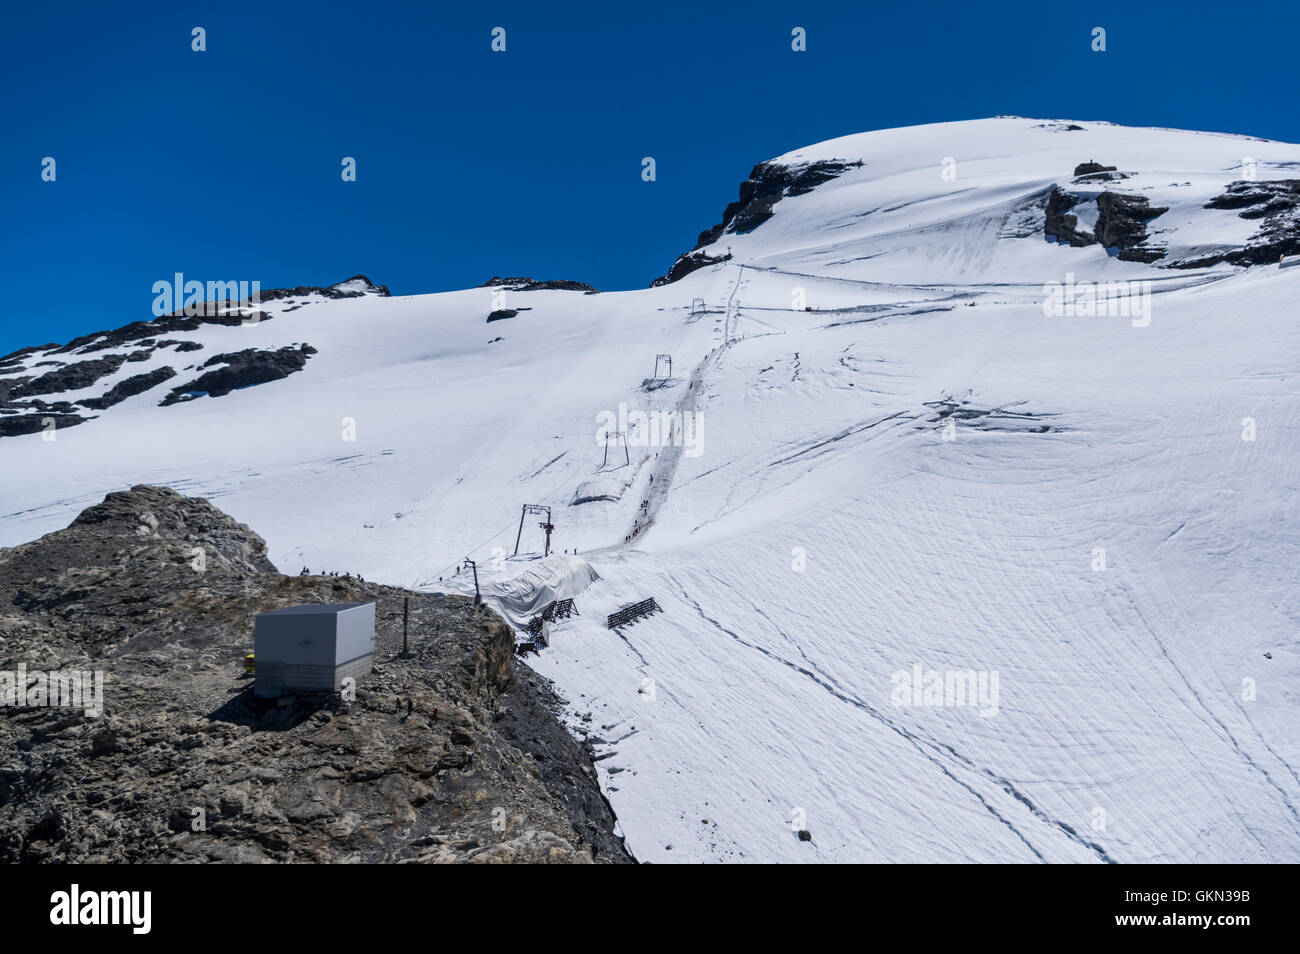 Ski lift on Titlis glacier in summer. White foil close to lift masts placed to slow down glacier melting. Engelberg, Switzerland Stock Photo